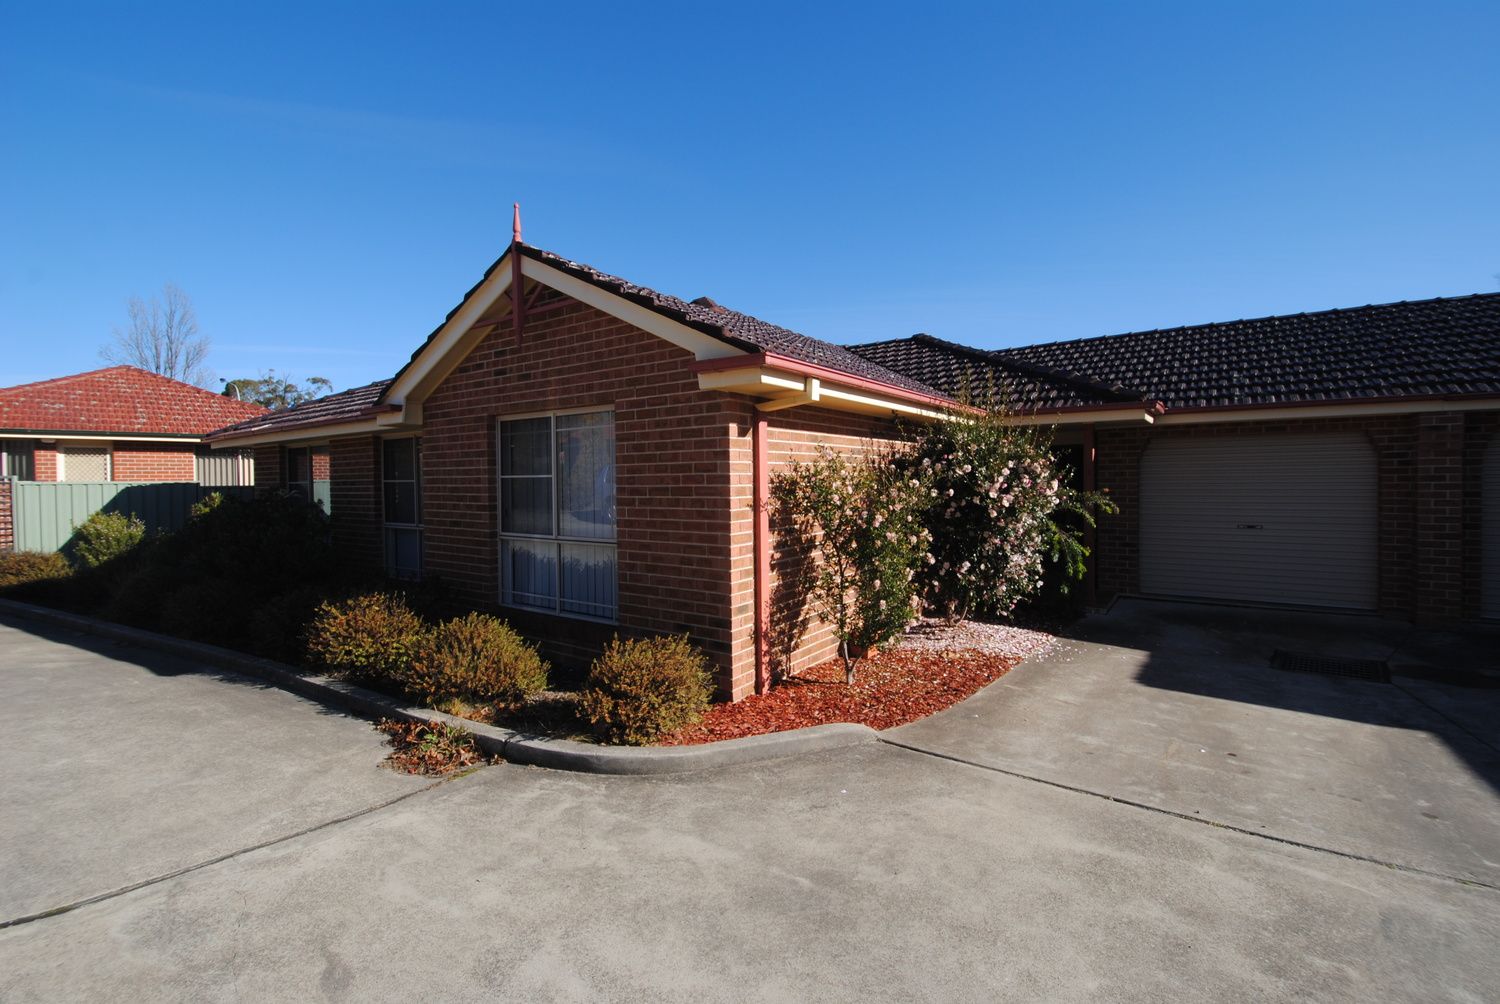 3 bedrooms House in 8/8 Longworth Street LITHGOW NSW, 2790